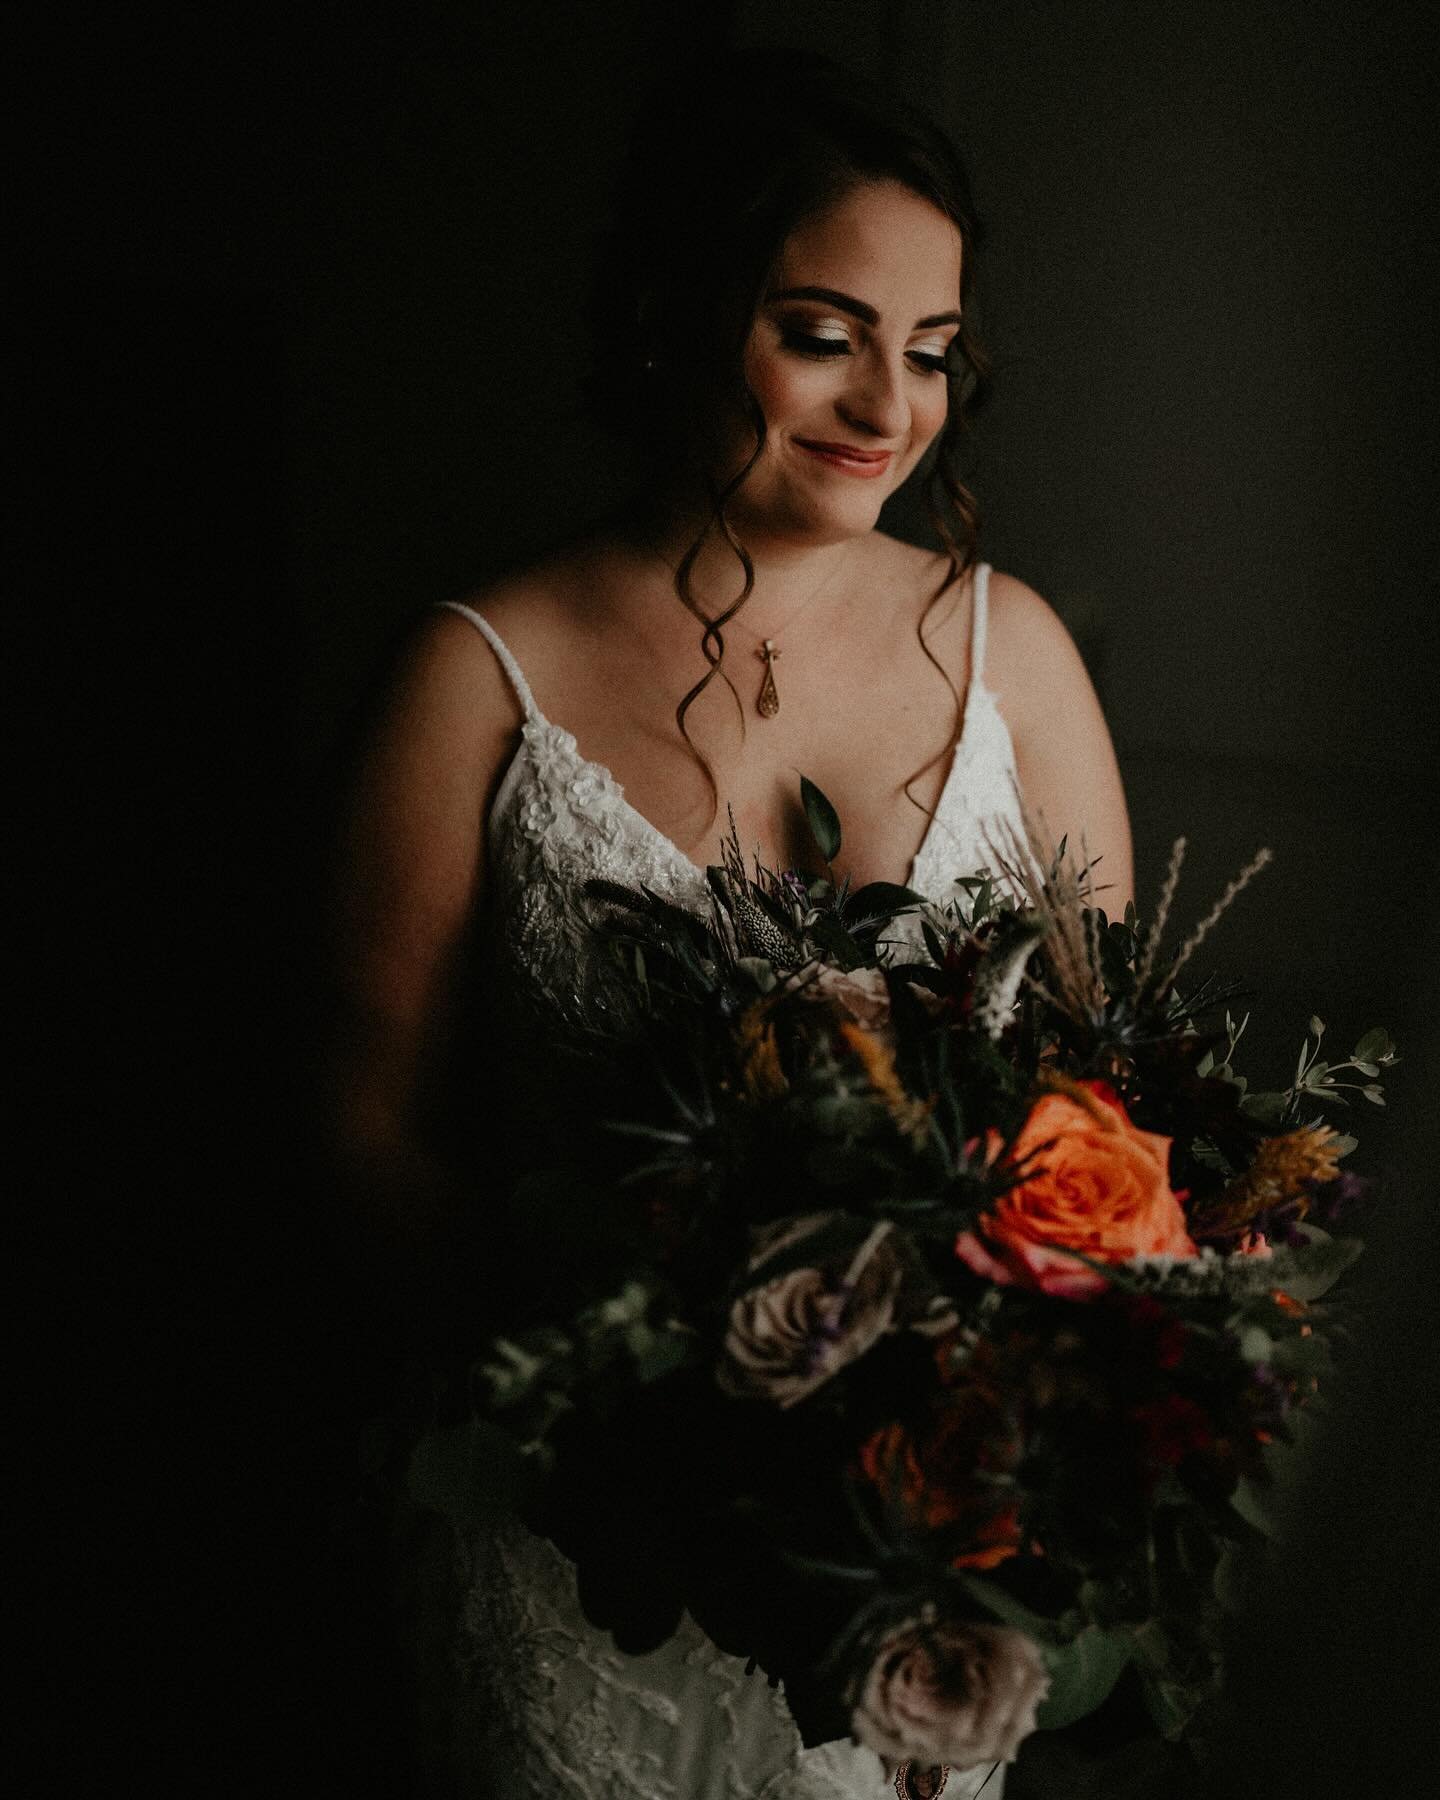 If you know me, you know I&rsquo;m obsessed with some gorgeous, moody, window lit getting ready moments.  Sharing some favs from this previous fall wedding &hearts;️#newjerseyweddingphotographer #phillyweddingphotographer #scrantonweddingphotographer